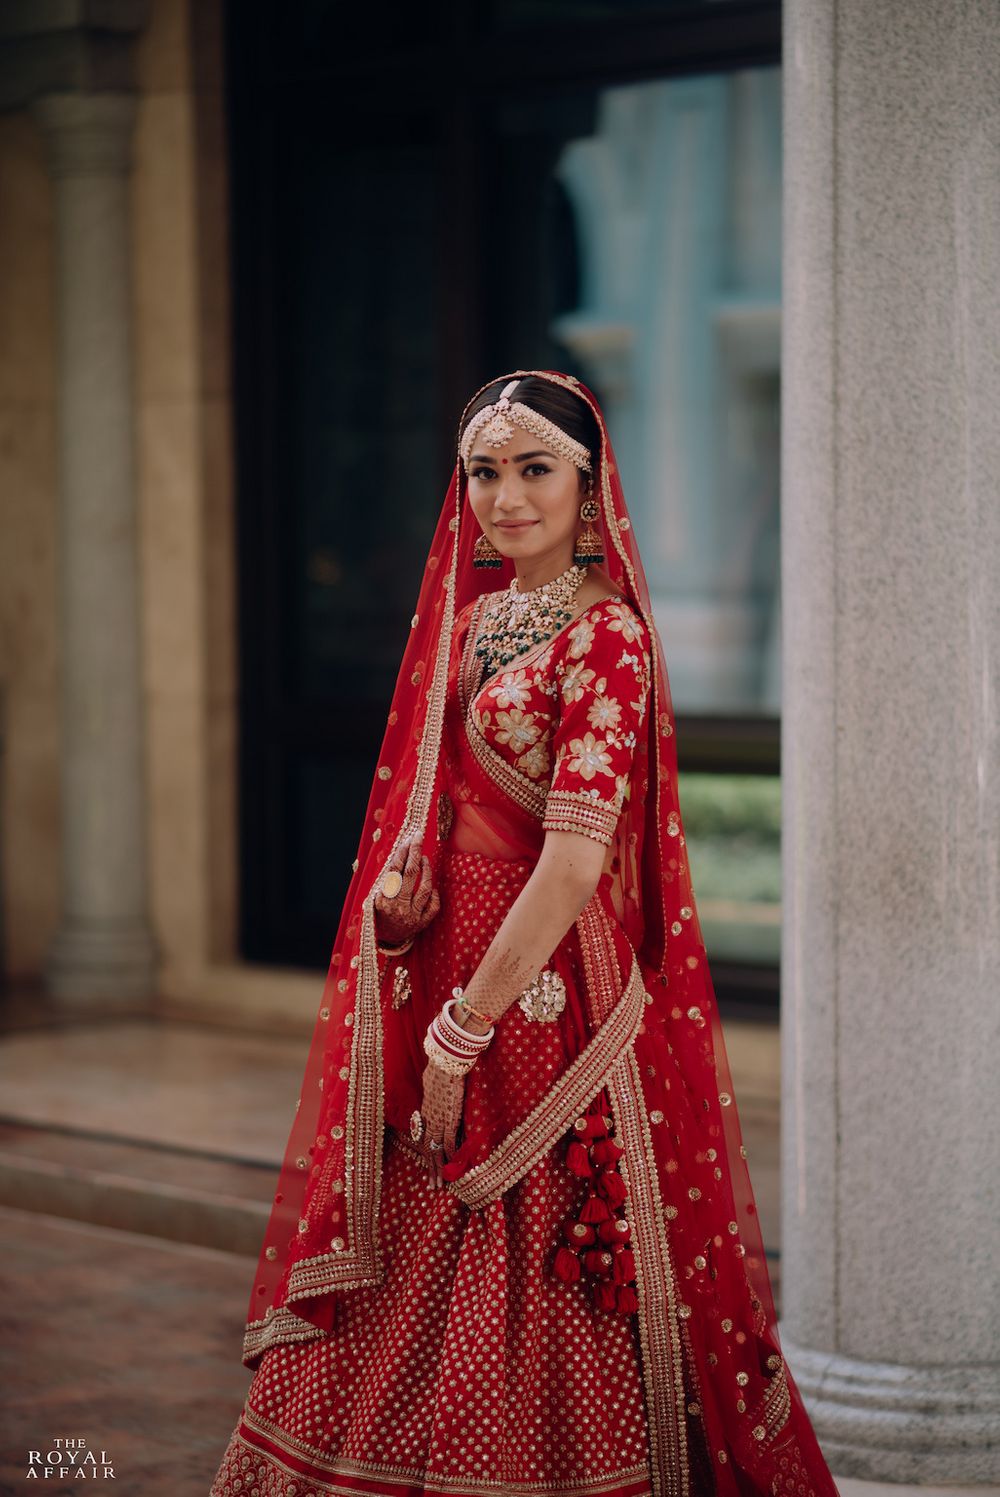 Photo of A bride in a red lehenga